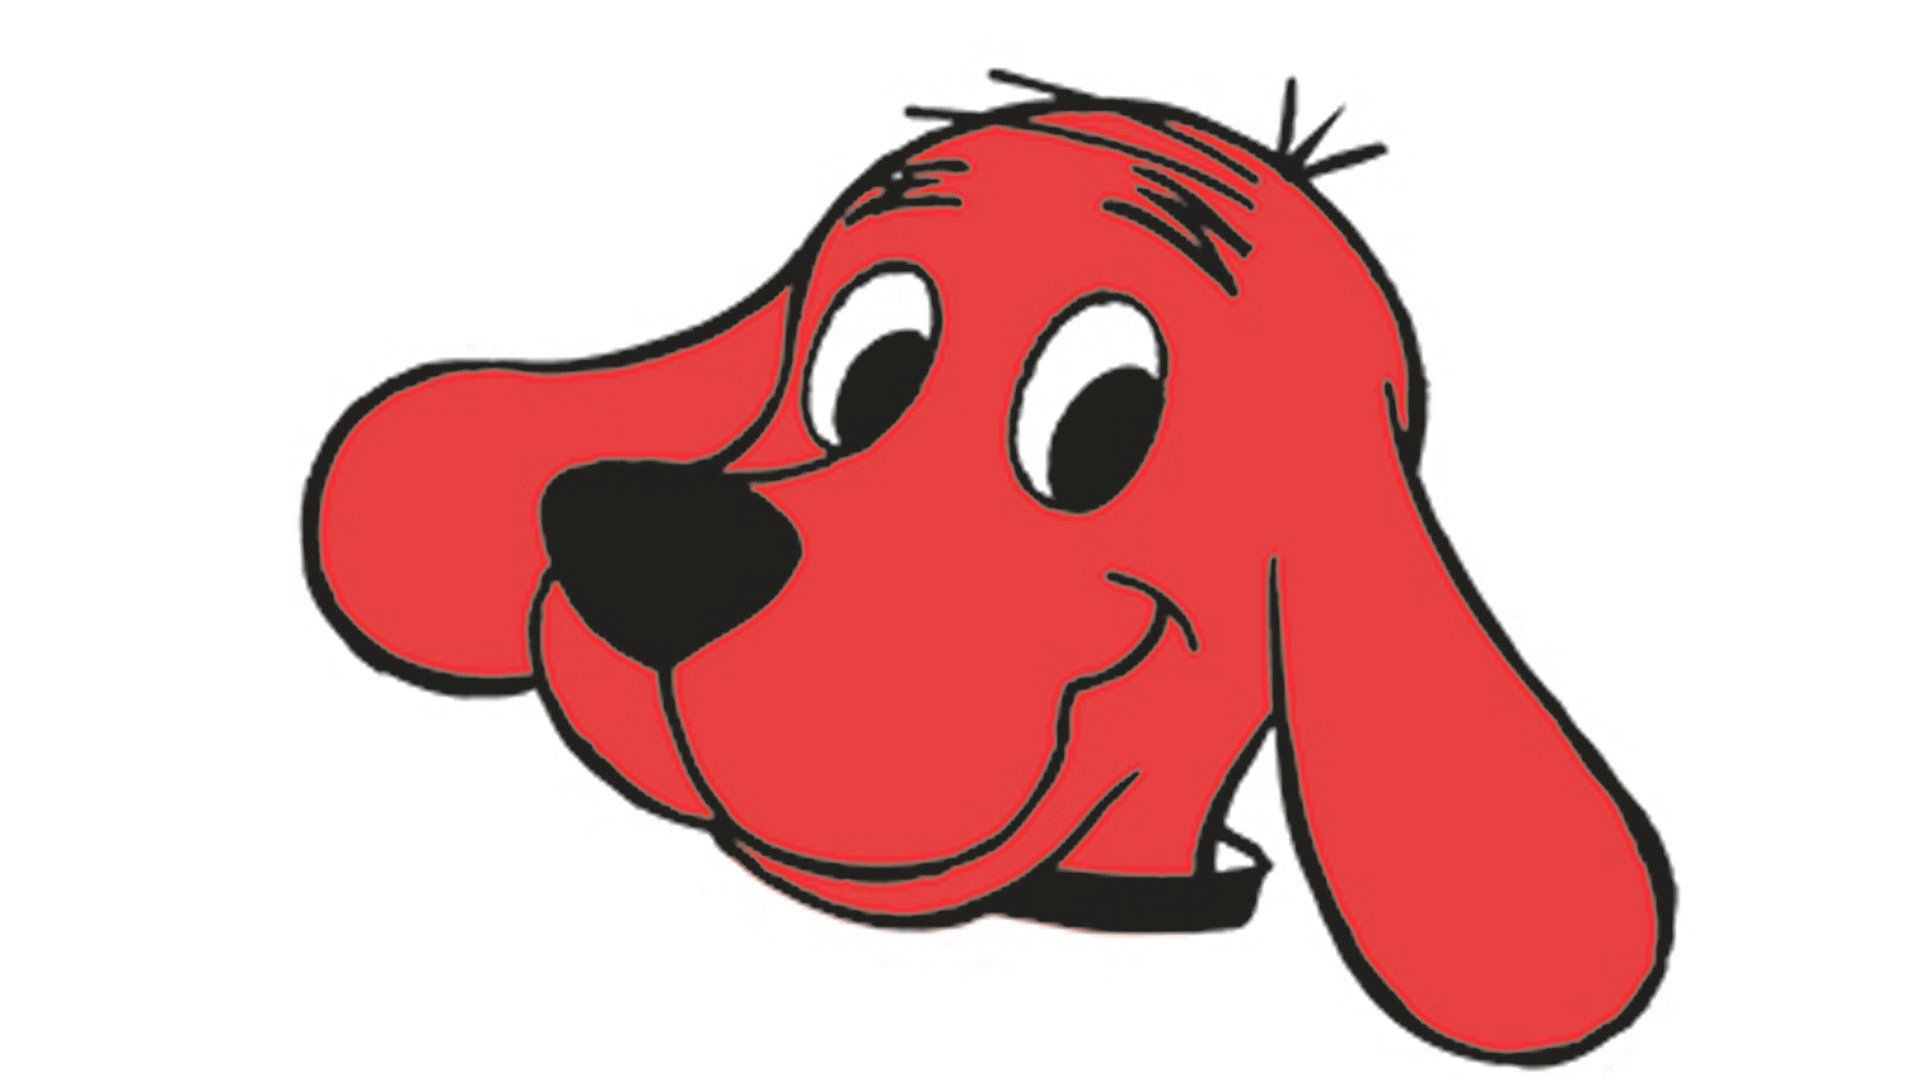 Clifford the Big Red Dog will pounce into the area